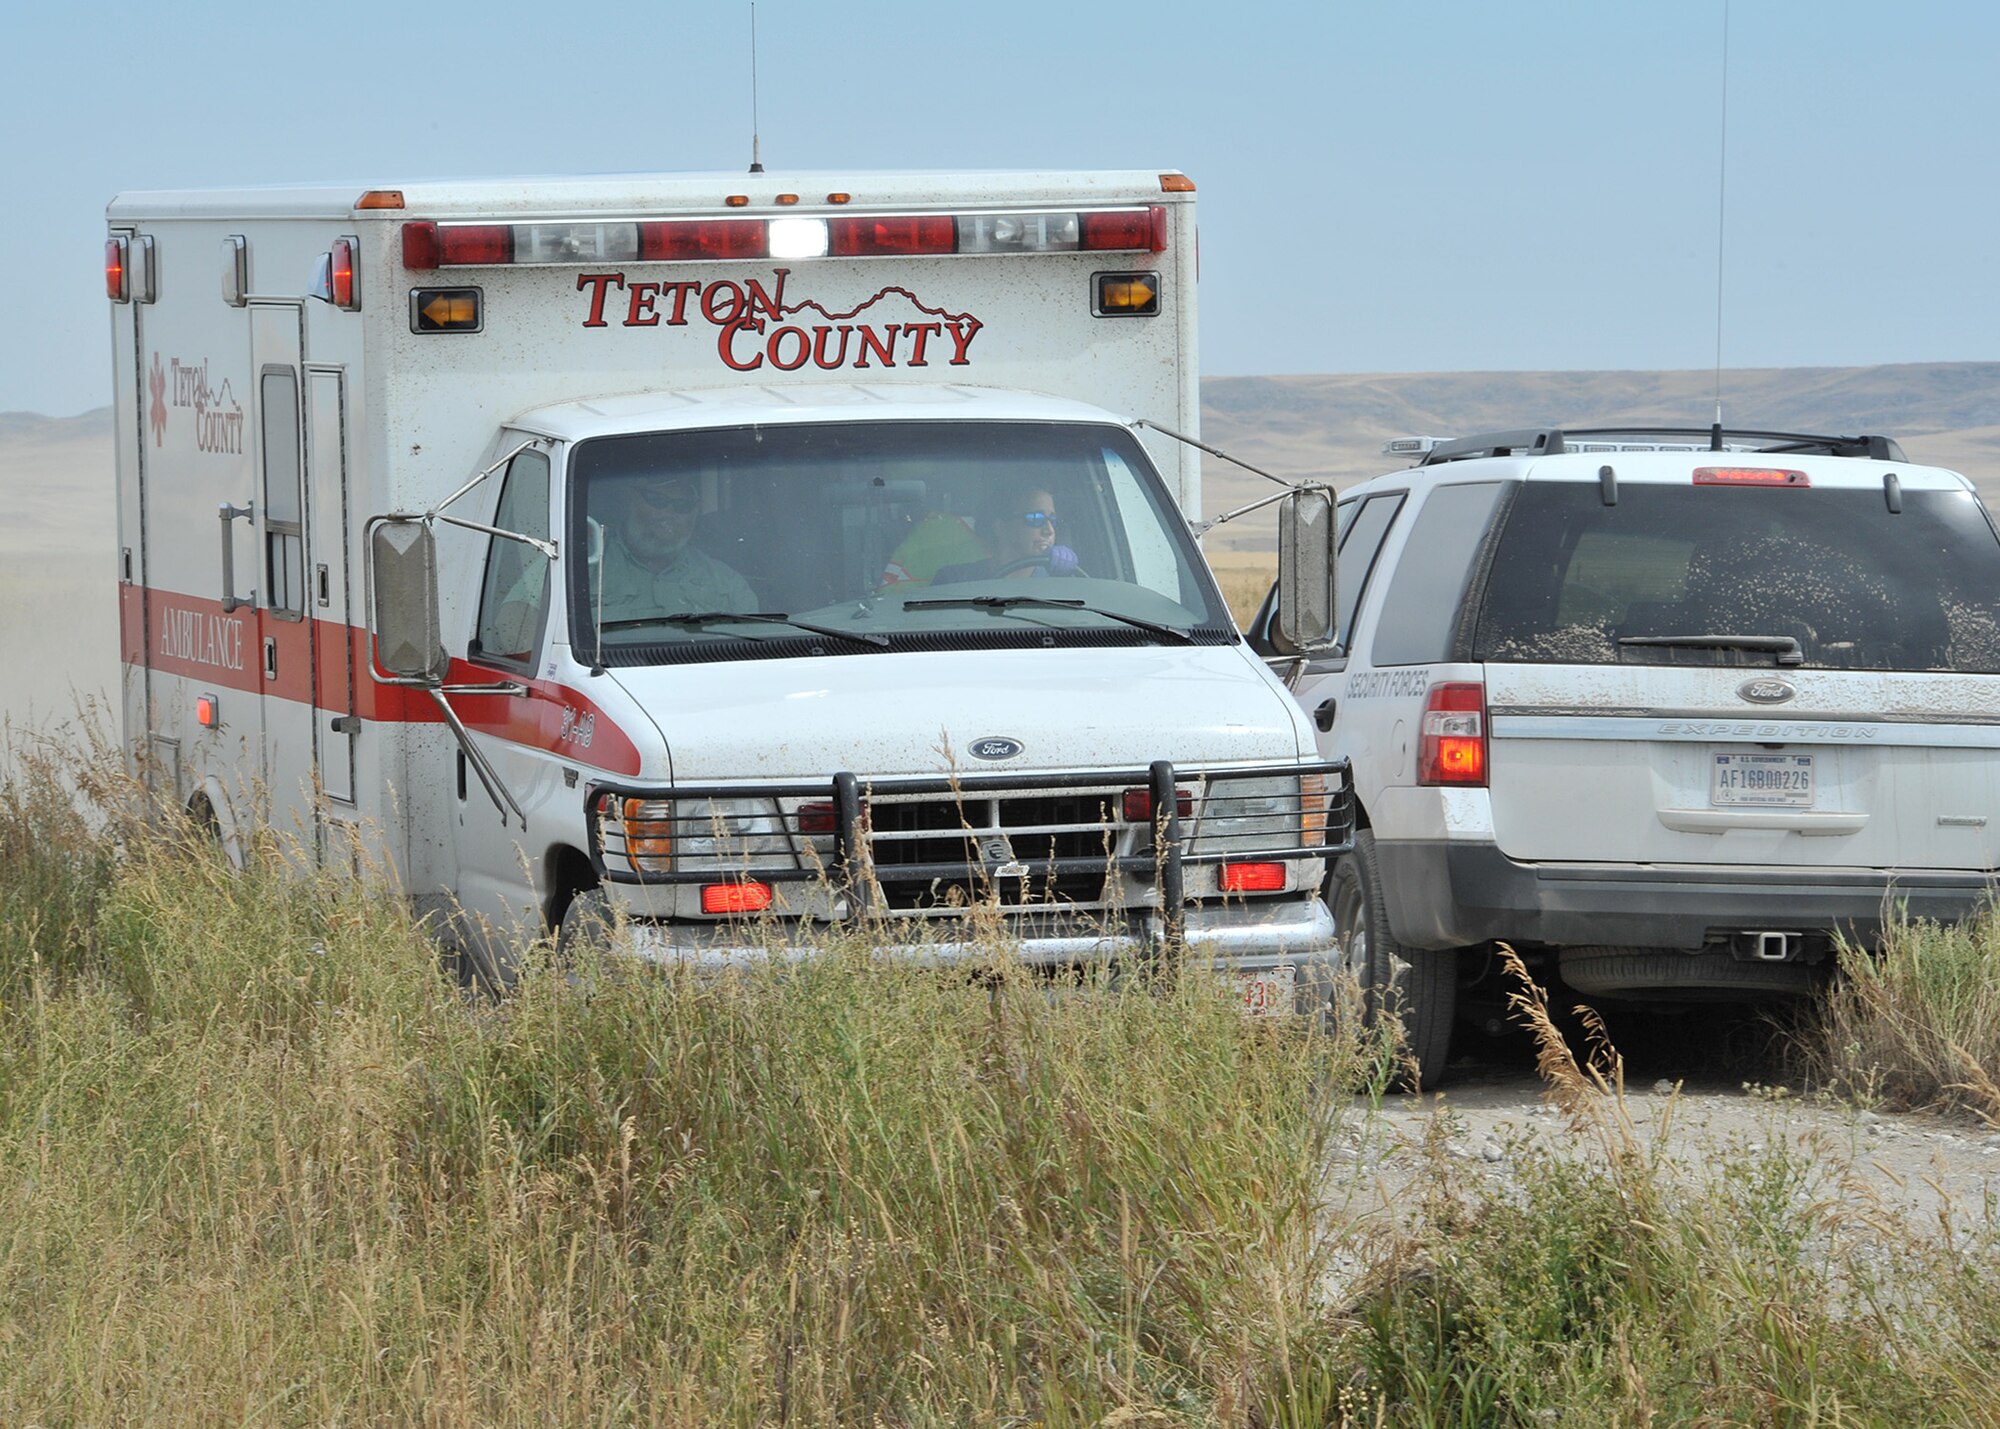 An ambulance from Teton County Emergency Medical Services is processed onto the scene of a mock attack on an Air Force convoy to treat simulated casualties during a Local Integrated Response Plan exercise Aug. 16, 2017 near Choteau, Mont.